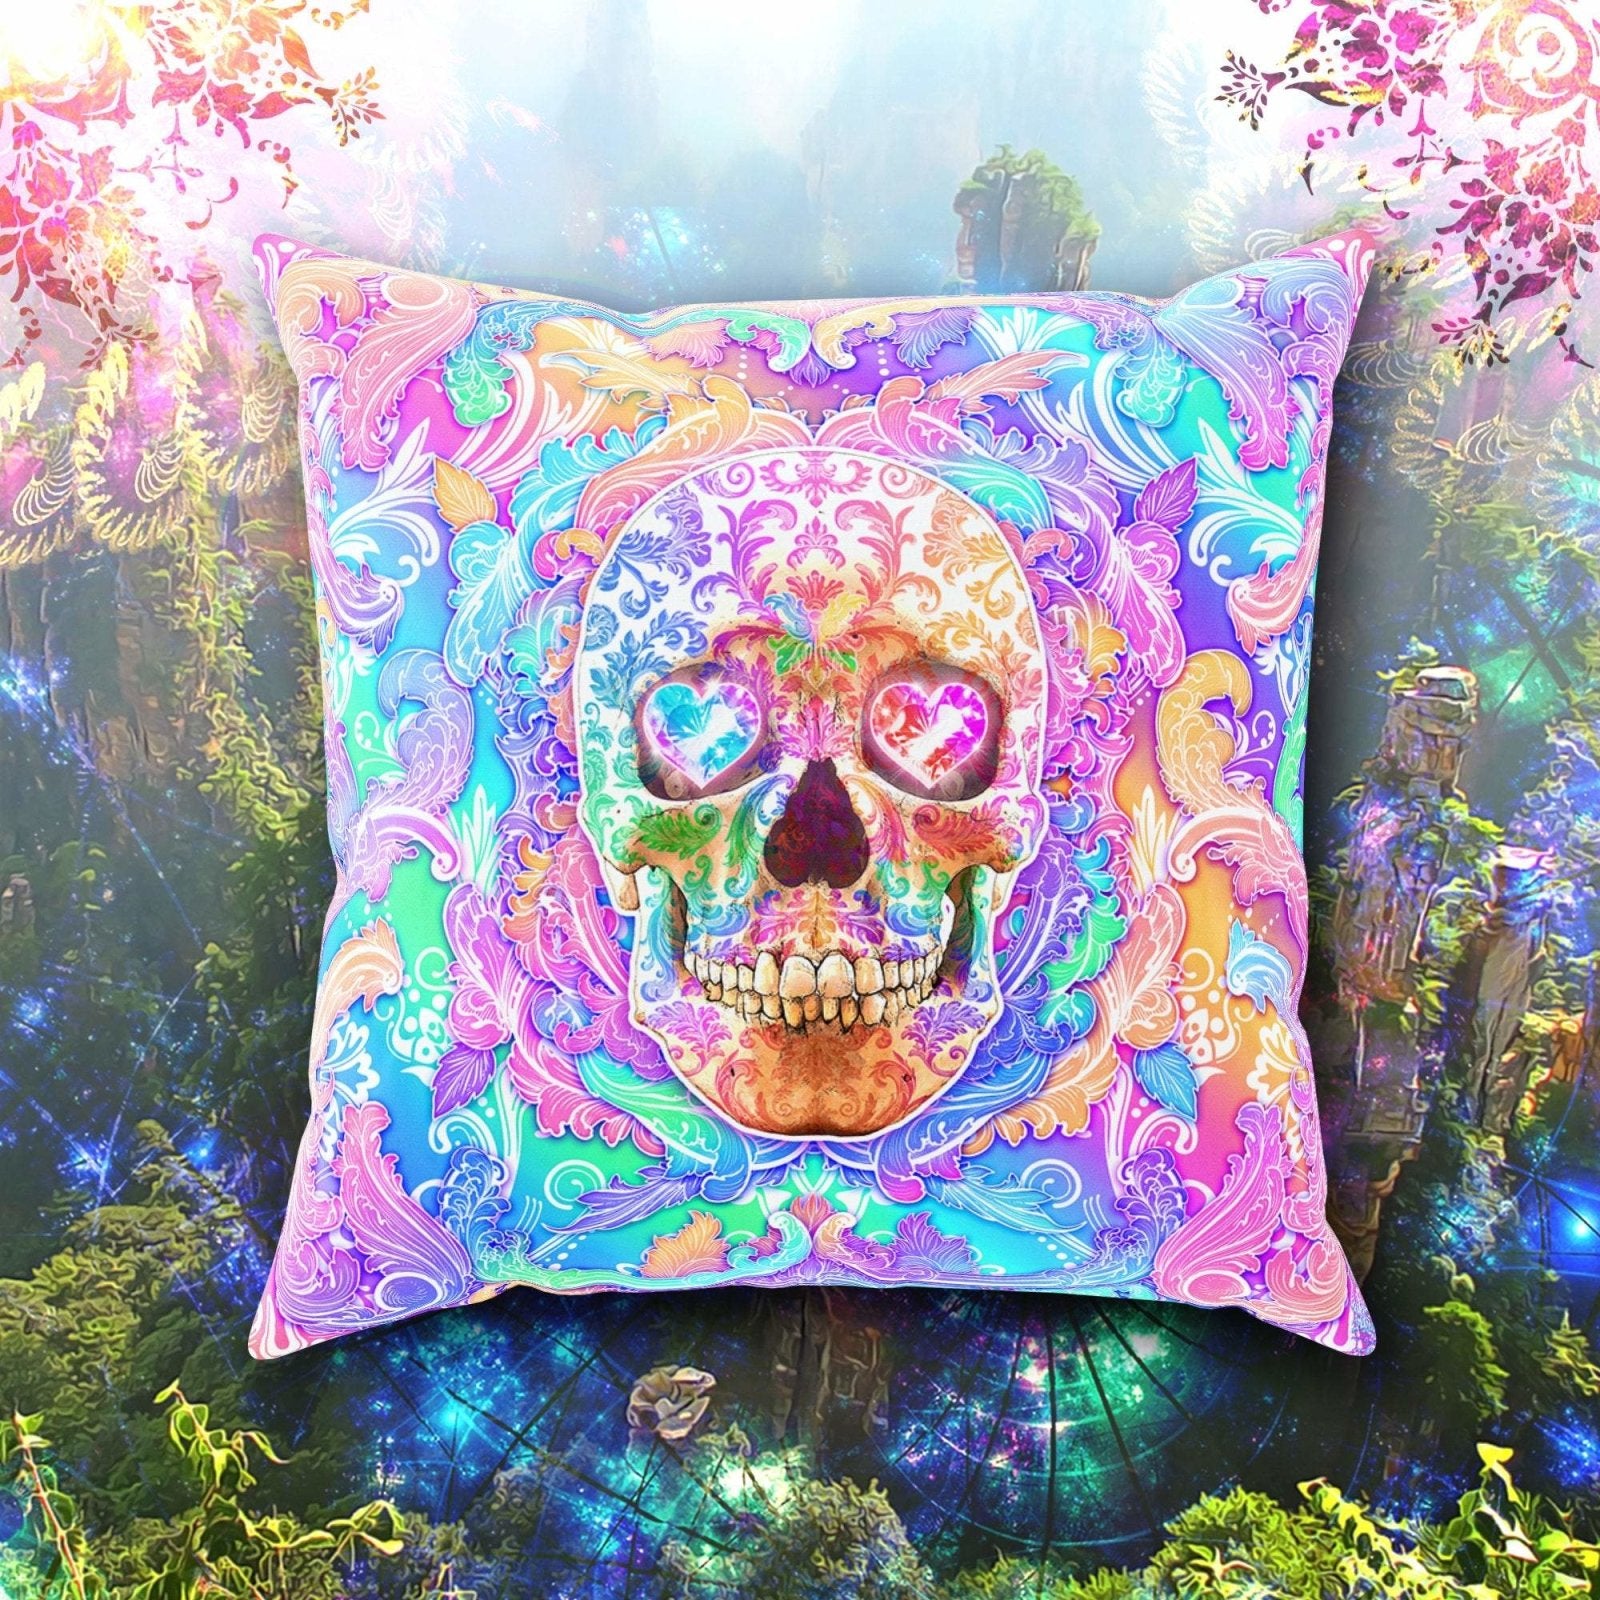 Aesthetic Skull Throw Pillow, Decorative Accent Cushion, Pastel Horror Room Decor, Psychedelic Art, Funky and Eclectic Home - Abysm Internal